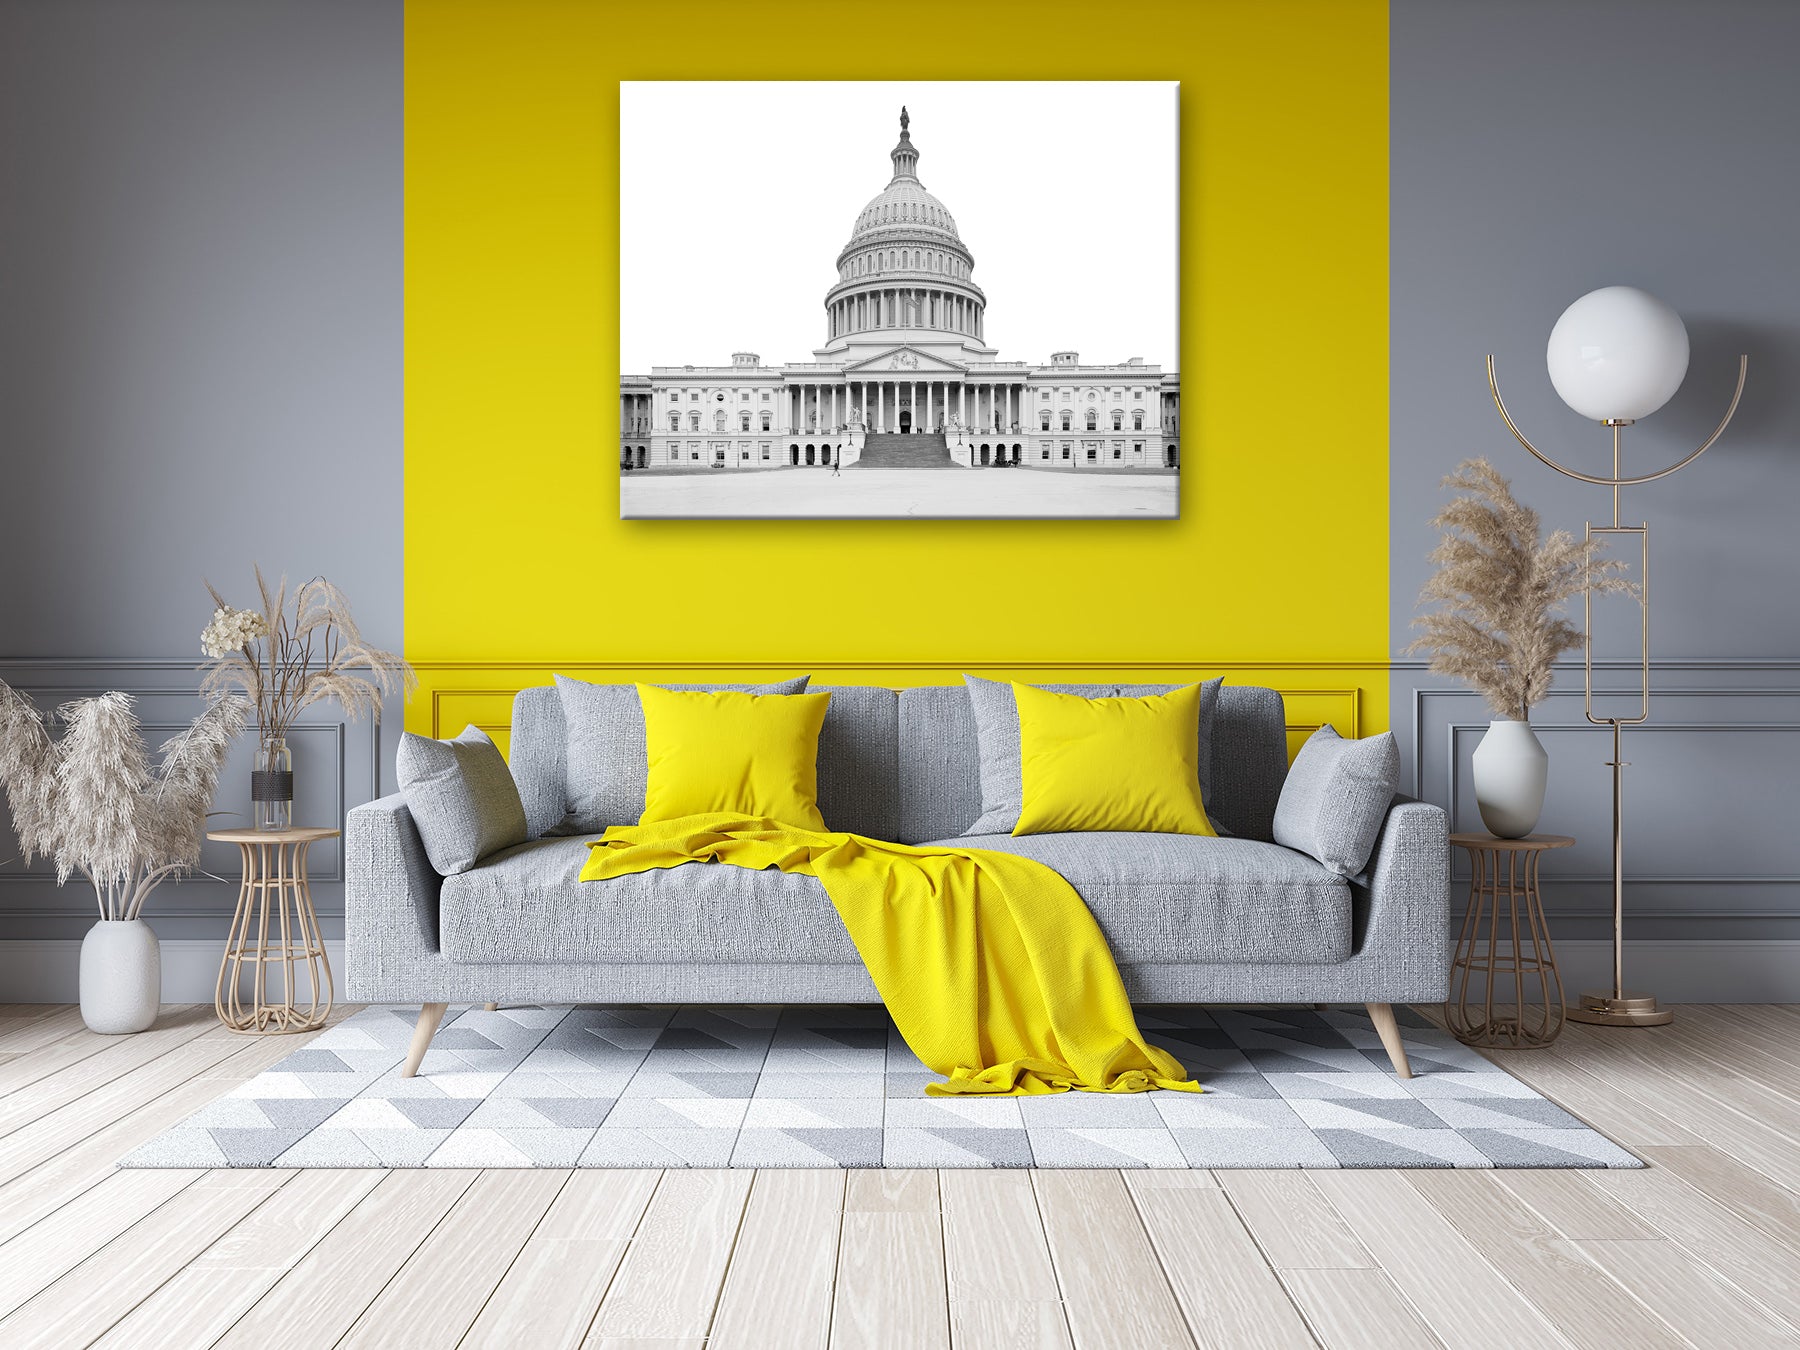 A canvas print hanging on a yellow wall, featuring a vintage image of the Capitol Building's main entrance